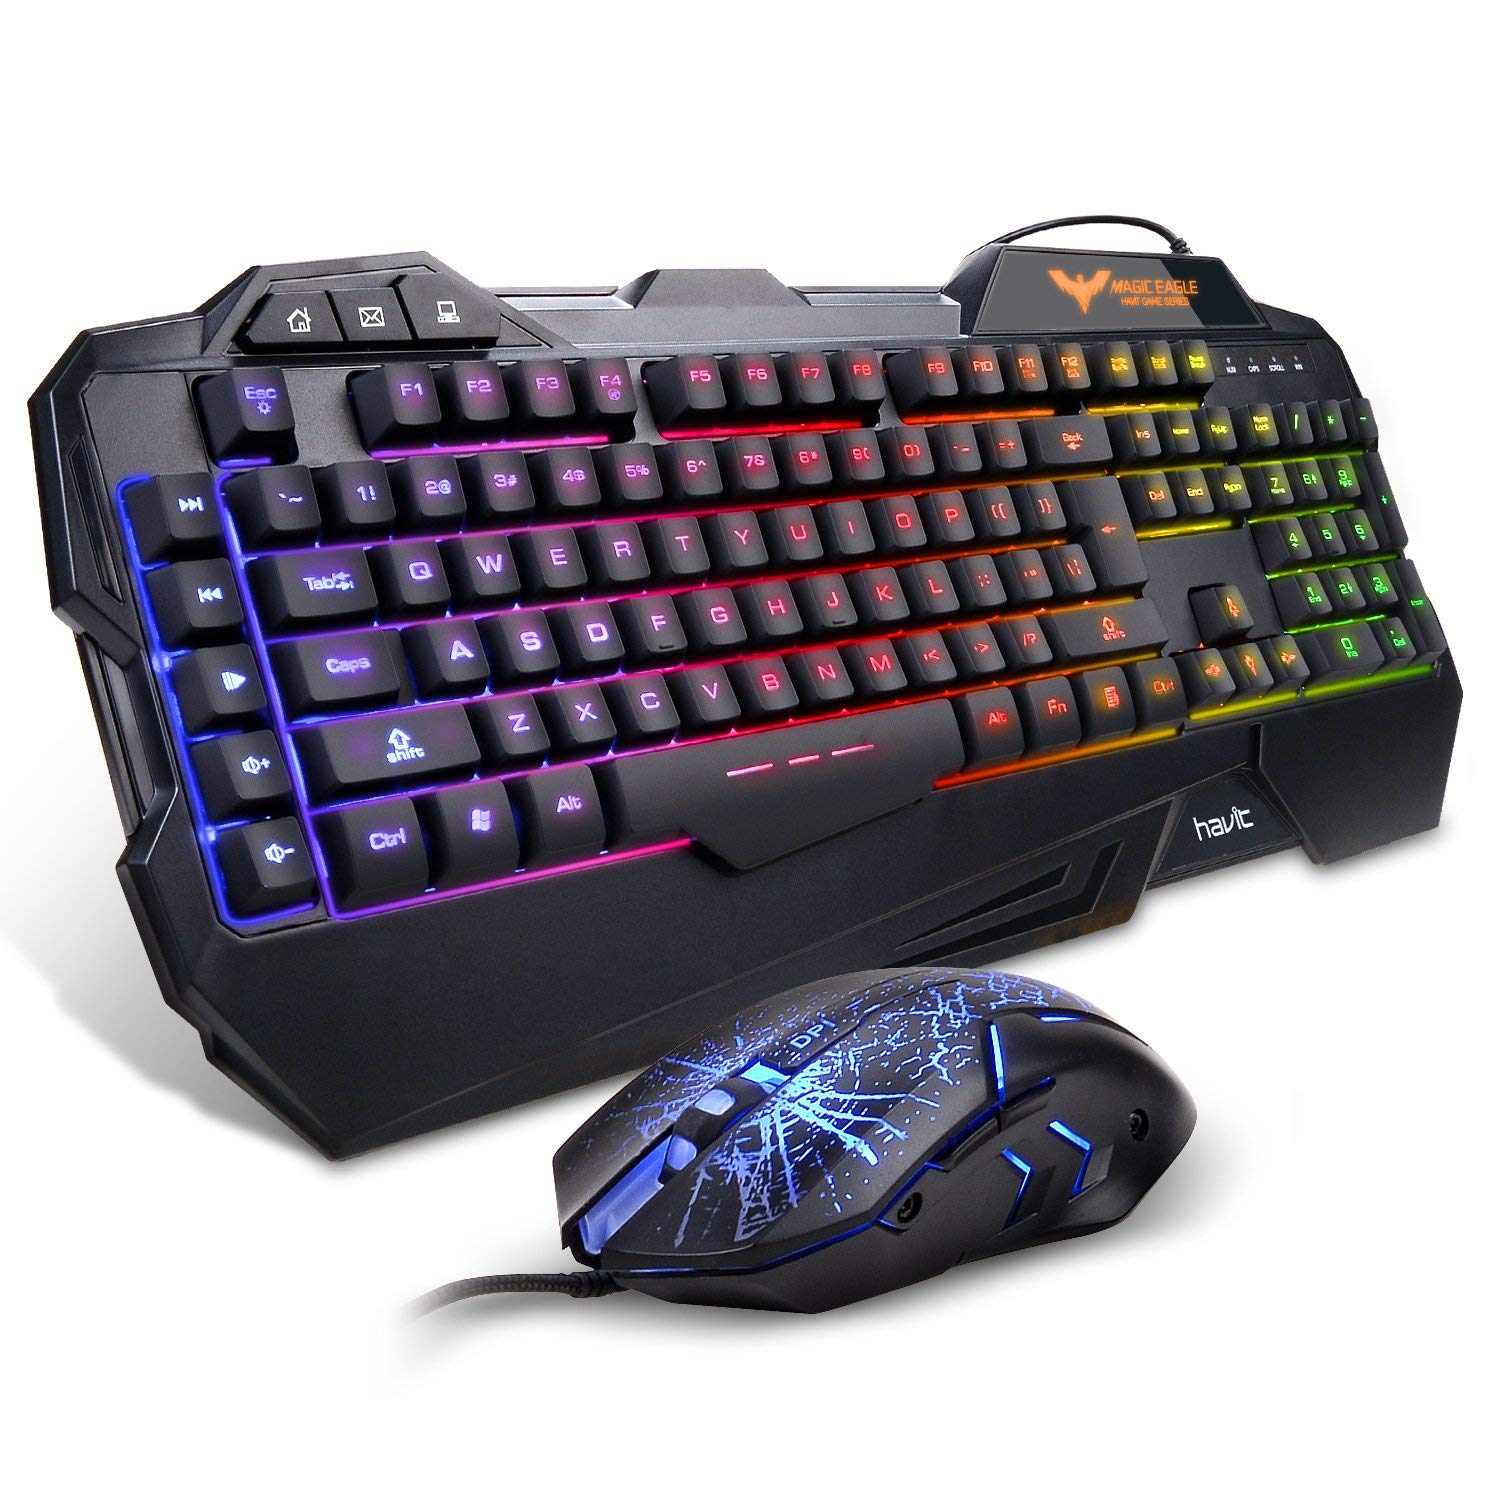 Best Budget Gaming Keyboard Reviews and Buying Guide 2019